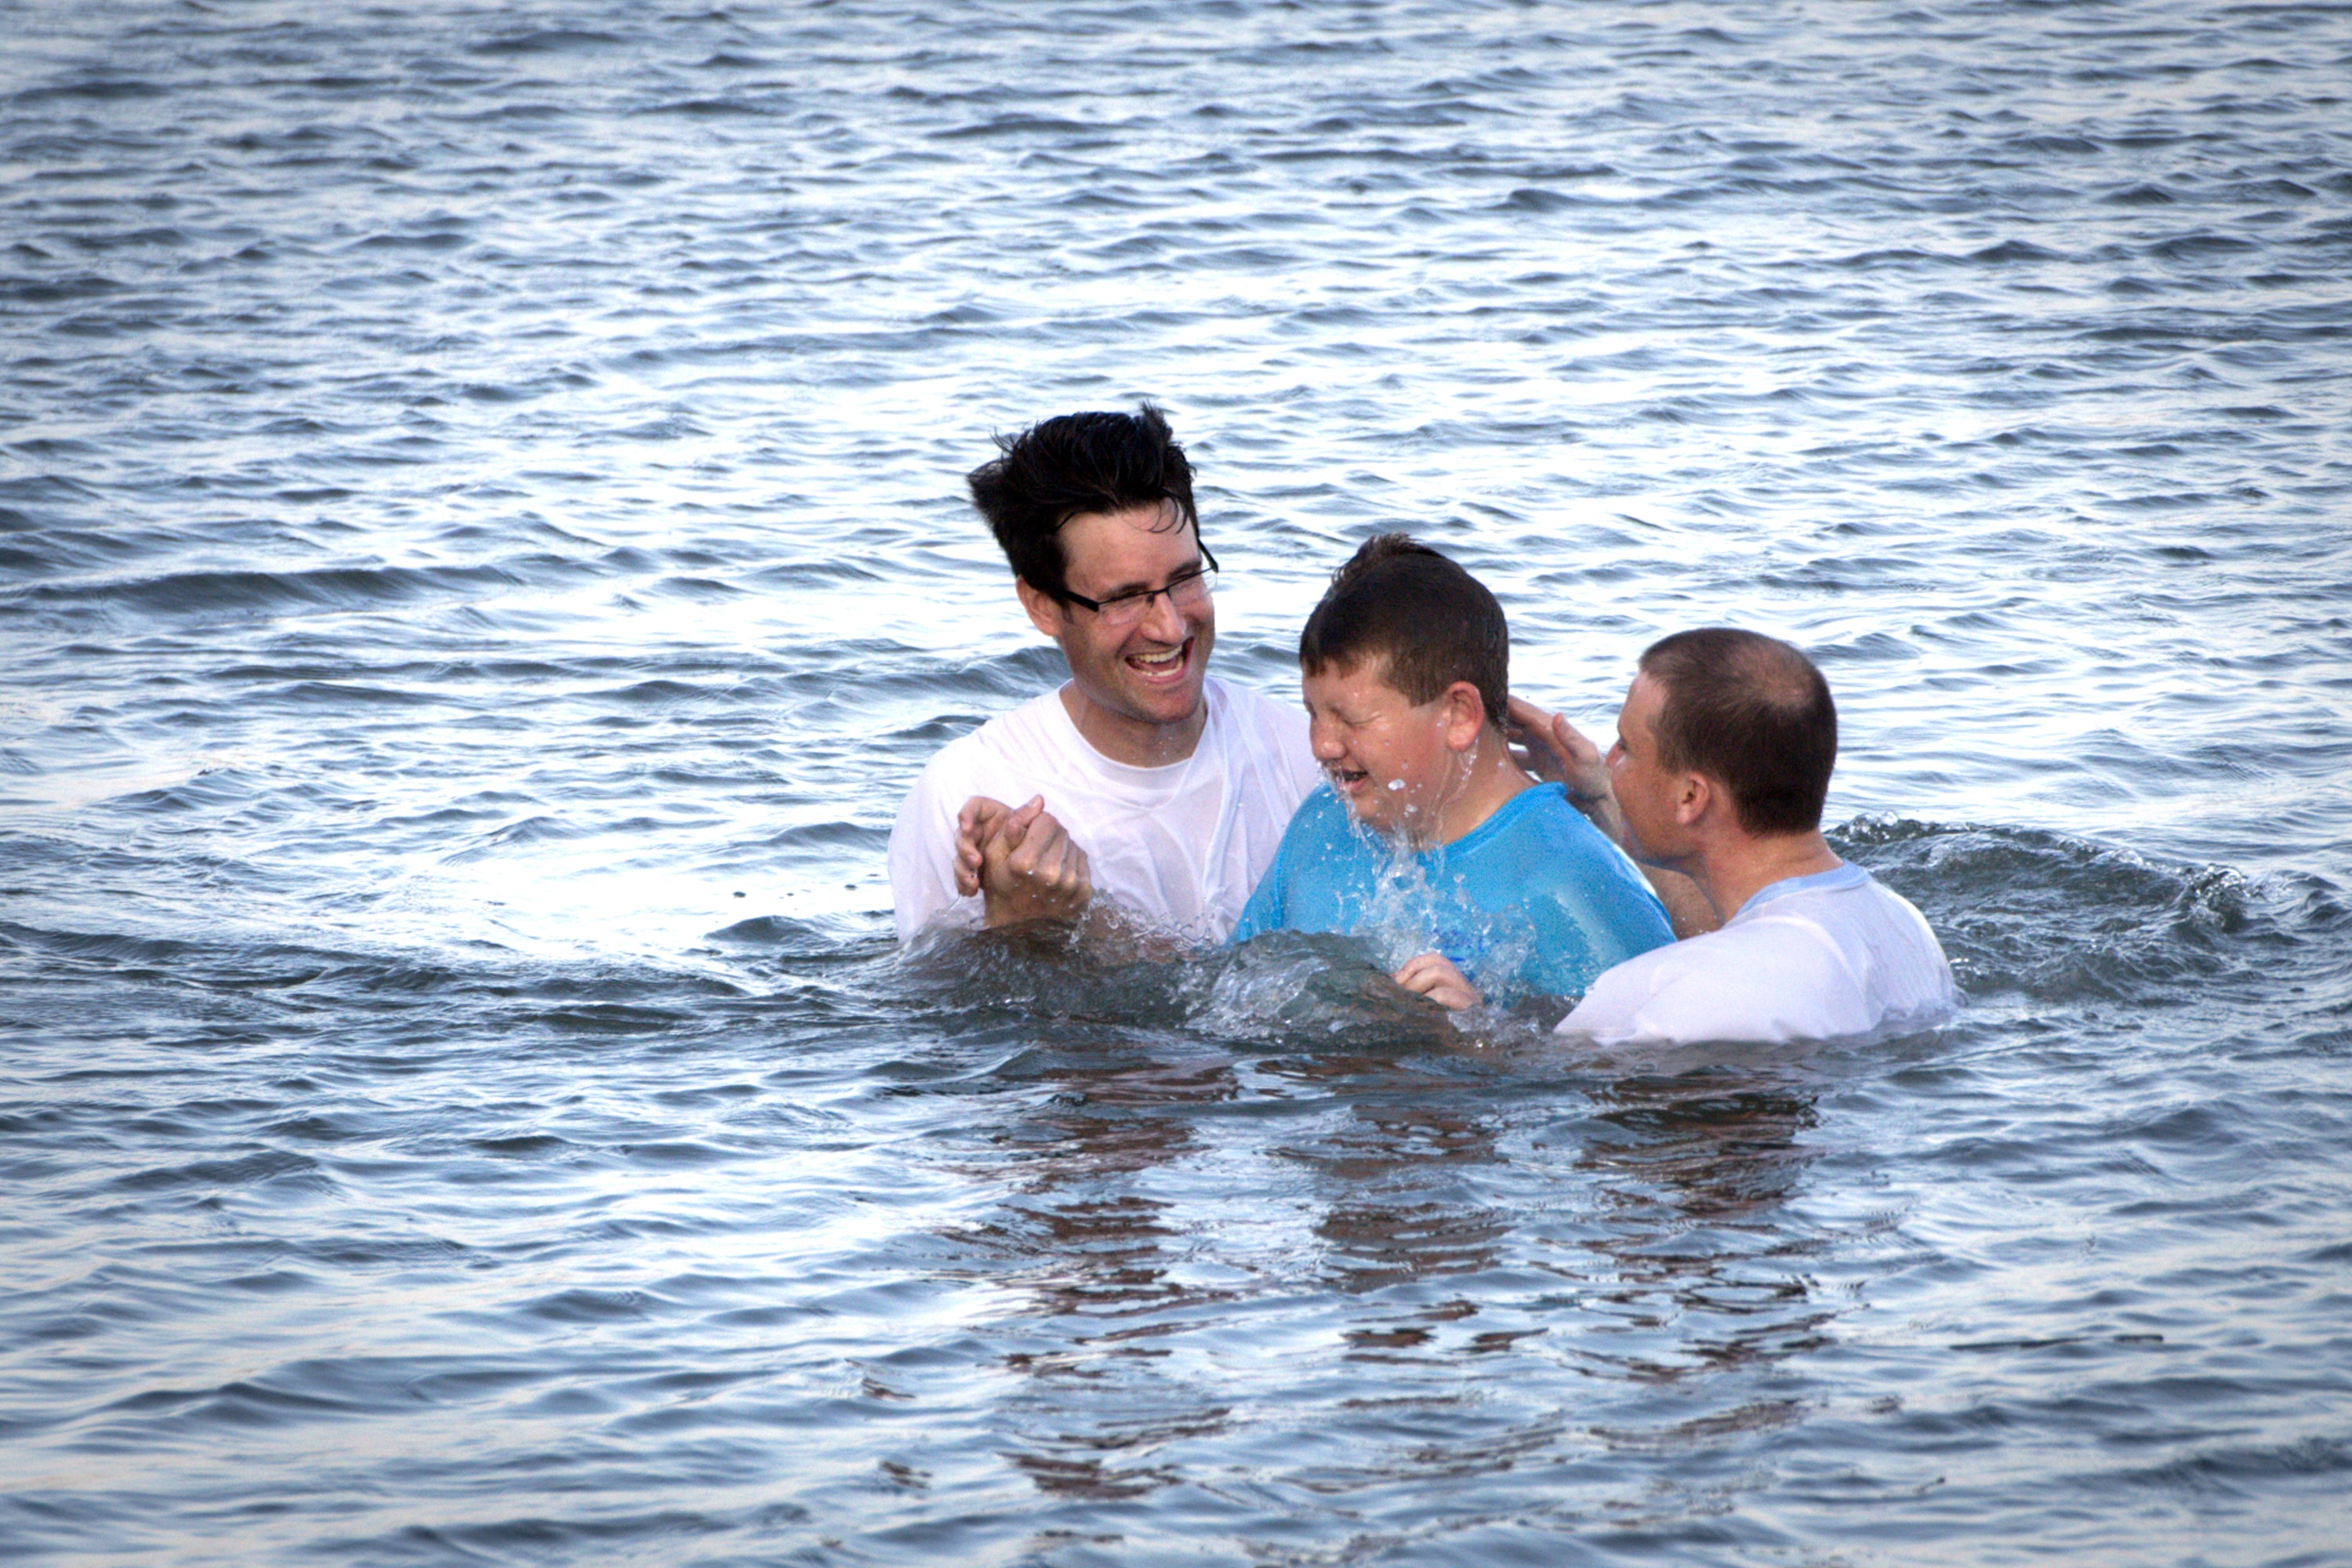 Marshall Greene (center) is baptized during the Annual Inlet Baptism in Murrells Inlet off the Belin Memorial United Methodist Church's seawall. Holding him is (left) Austin Bond, director of youth ministries and (right) Walter Cantwell, associate pastor. Photo by Benjamin Coy.